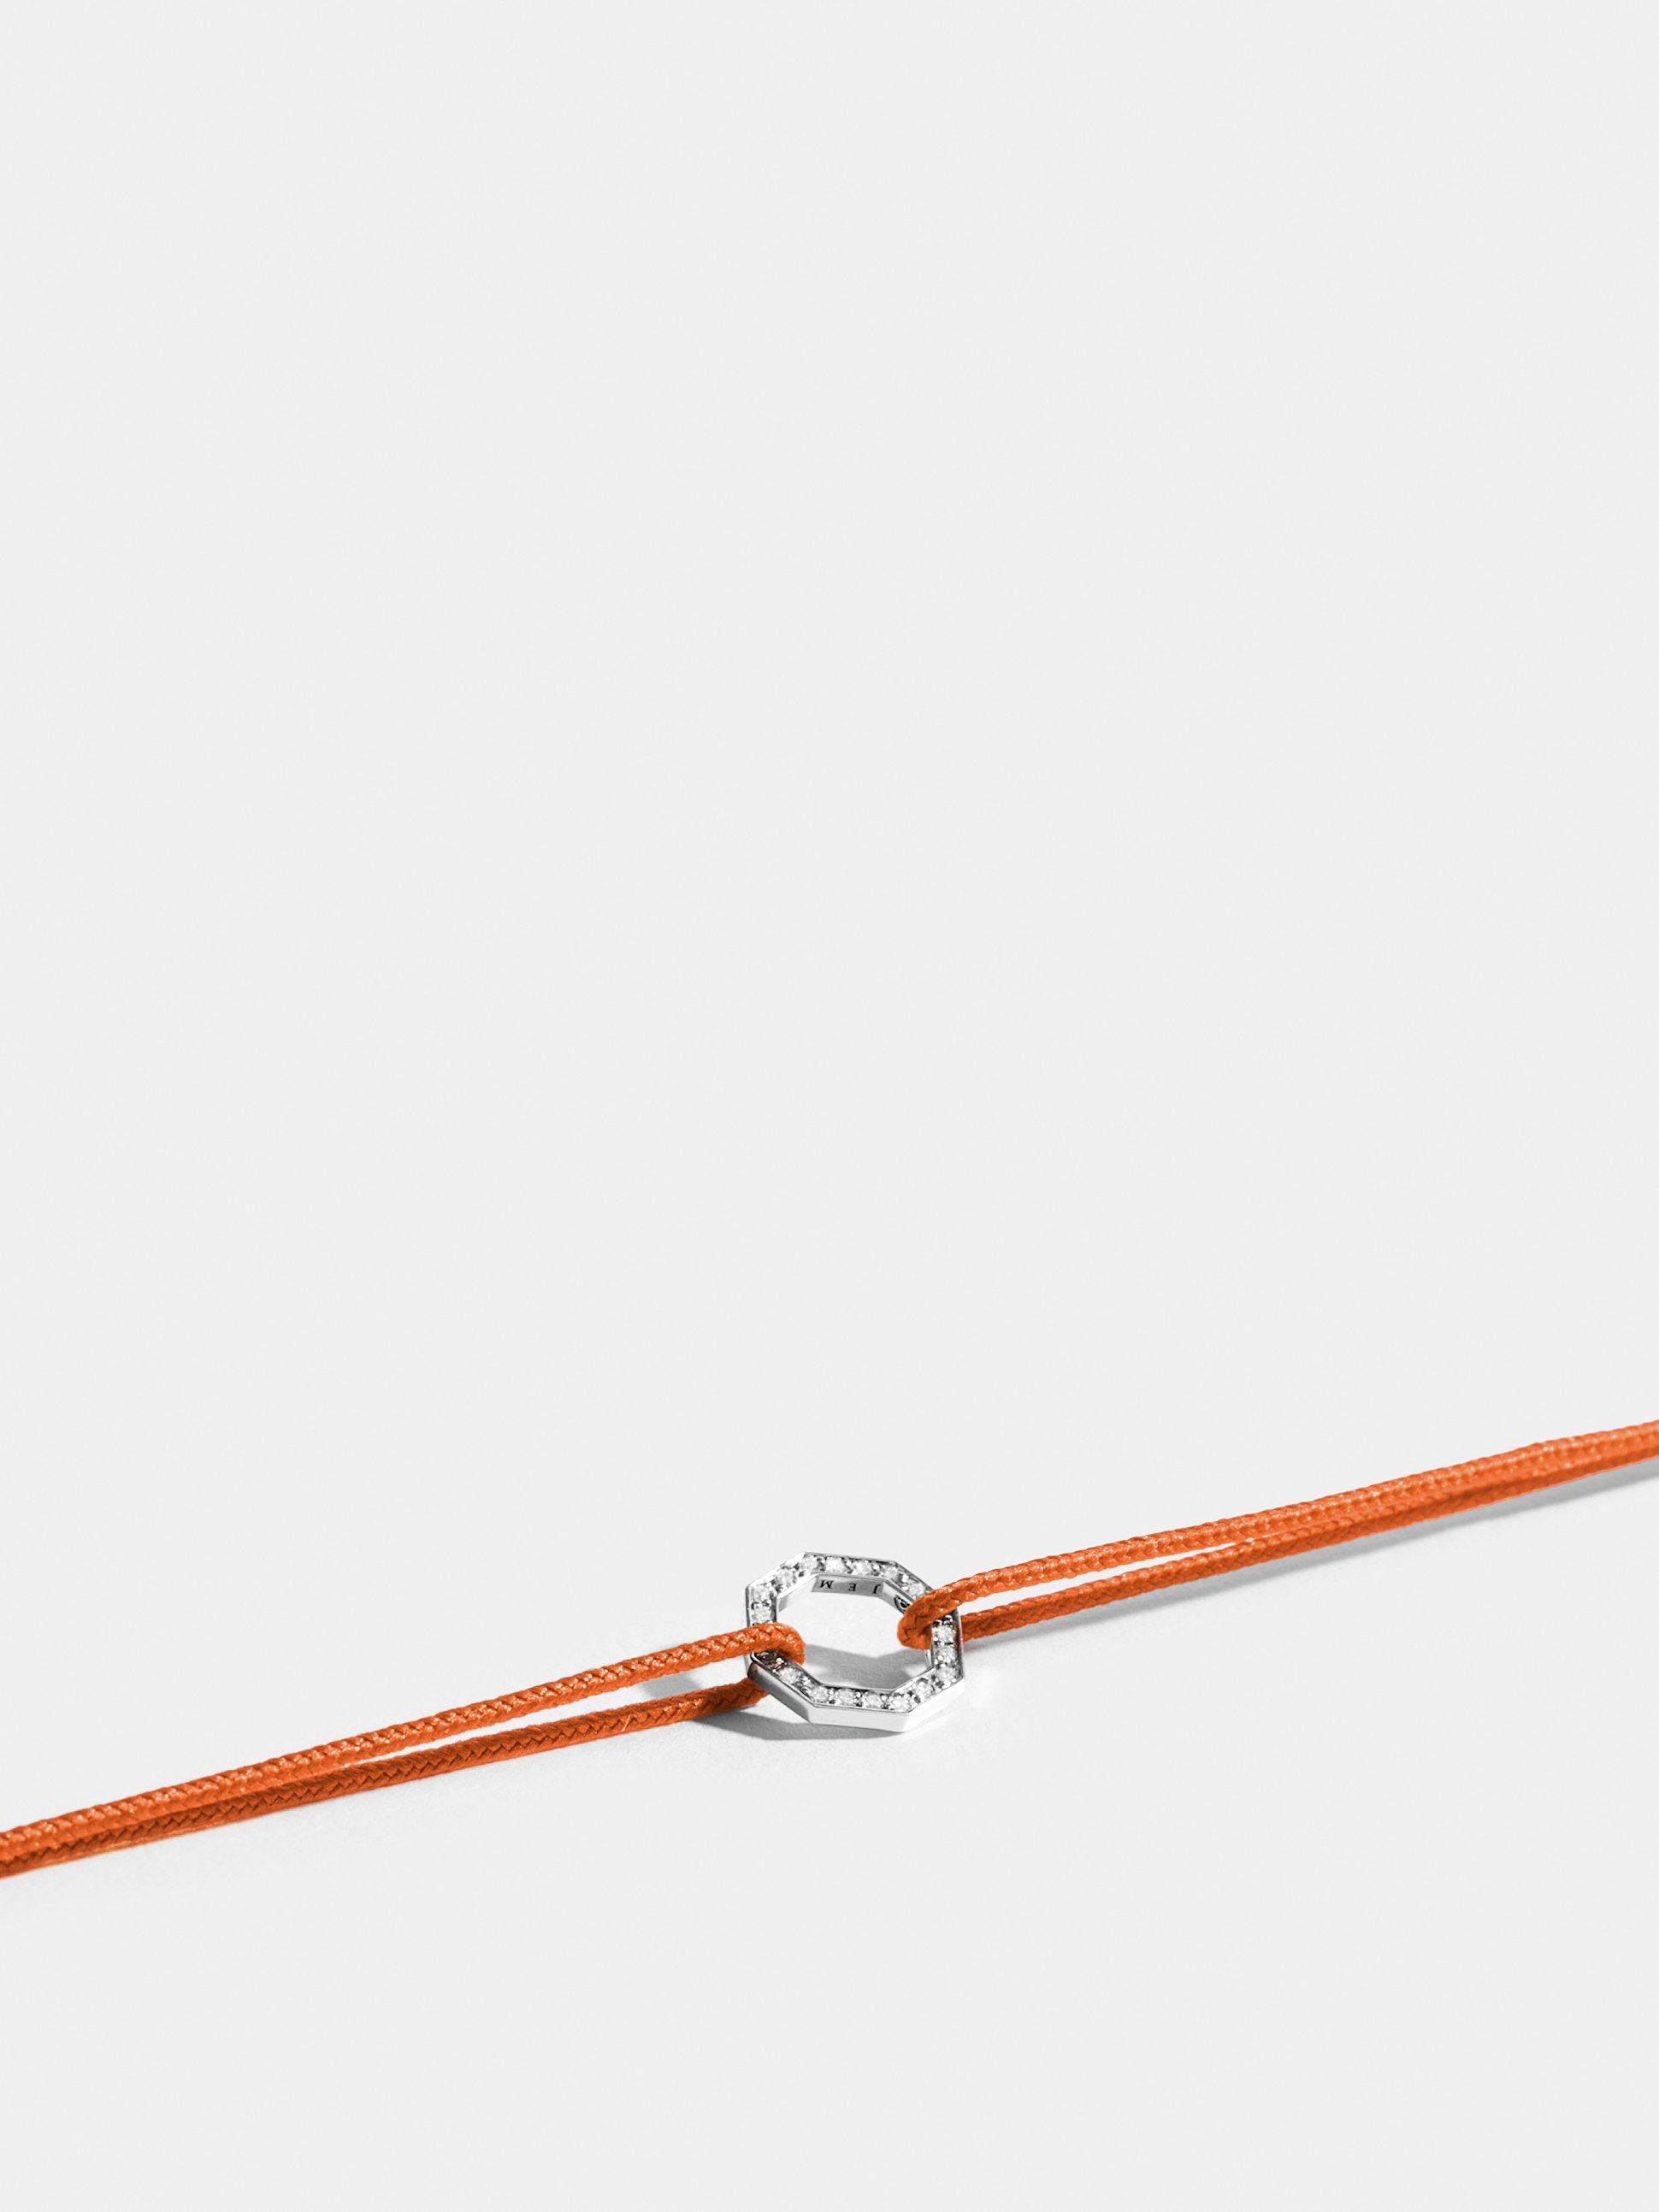 Octogone motif in 18k Fairmined ethical white gold, paved with lab-grown diamonds, on a bright orange cord.